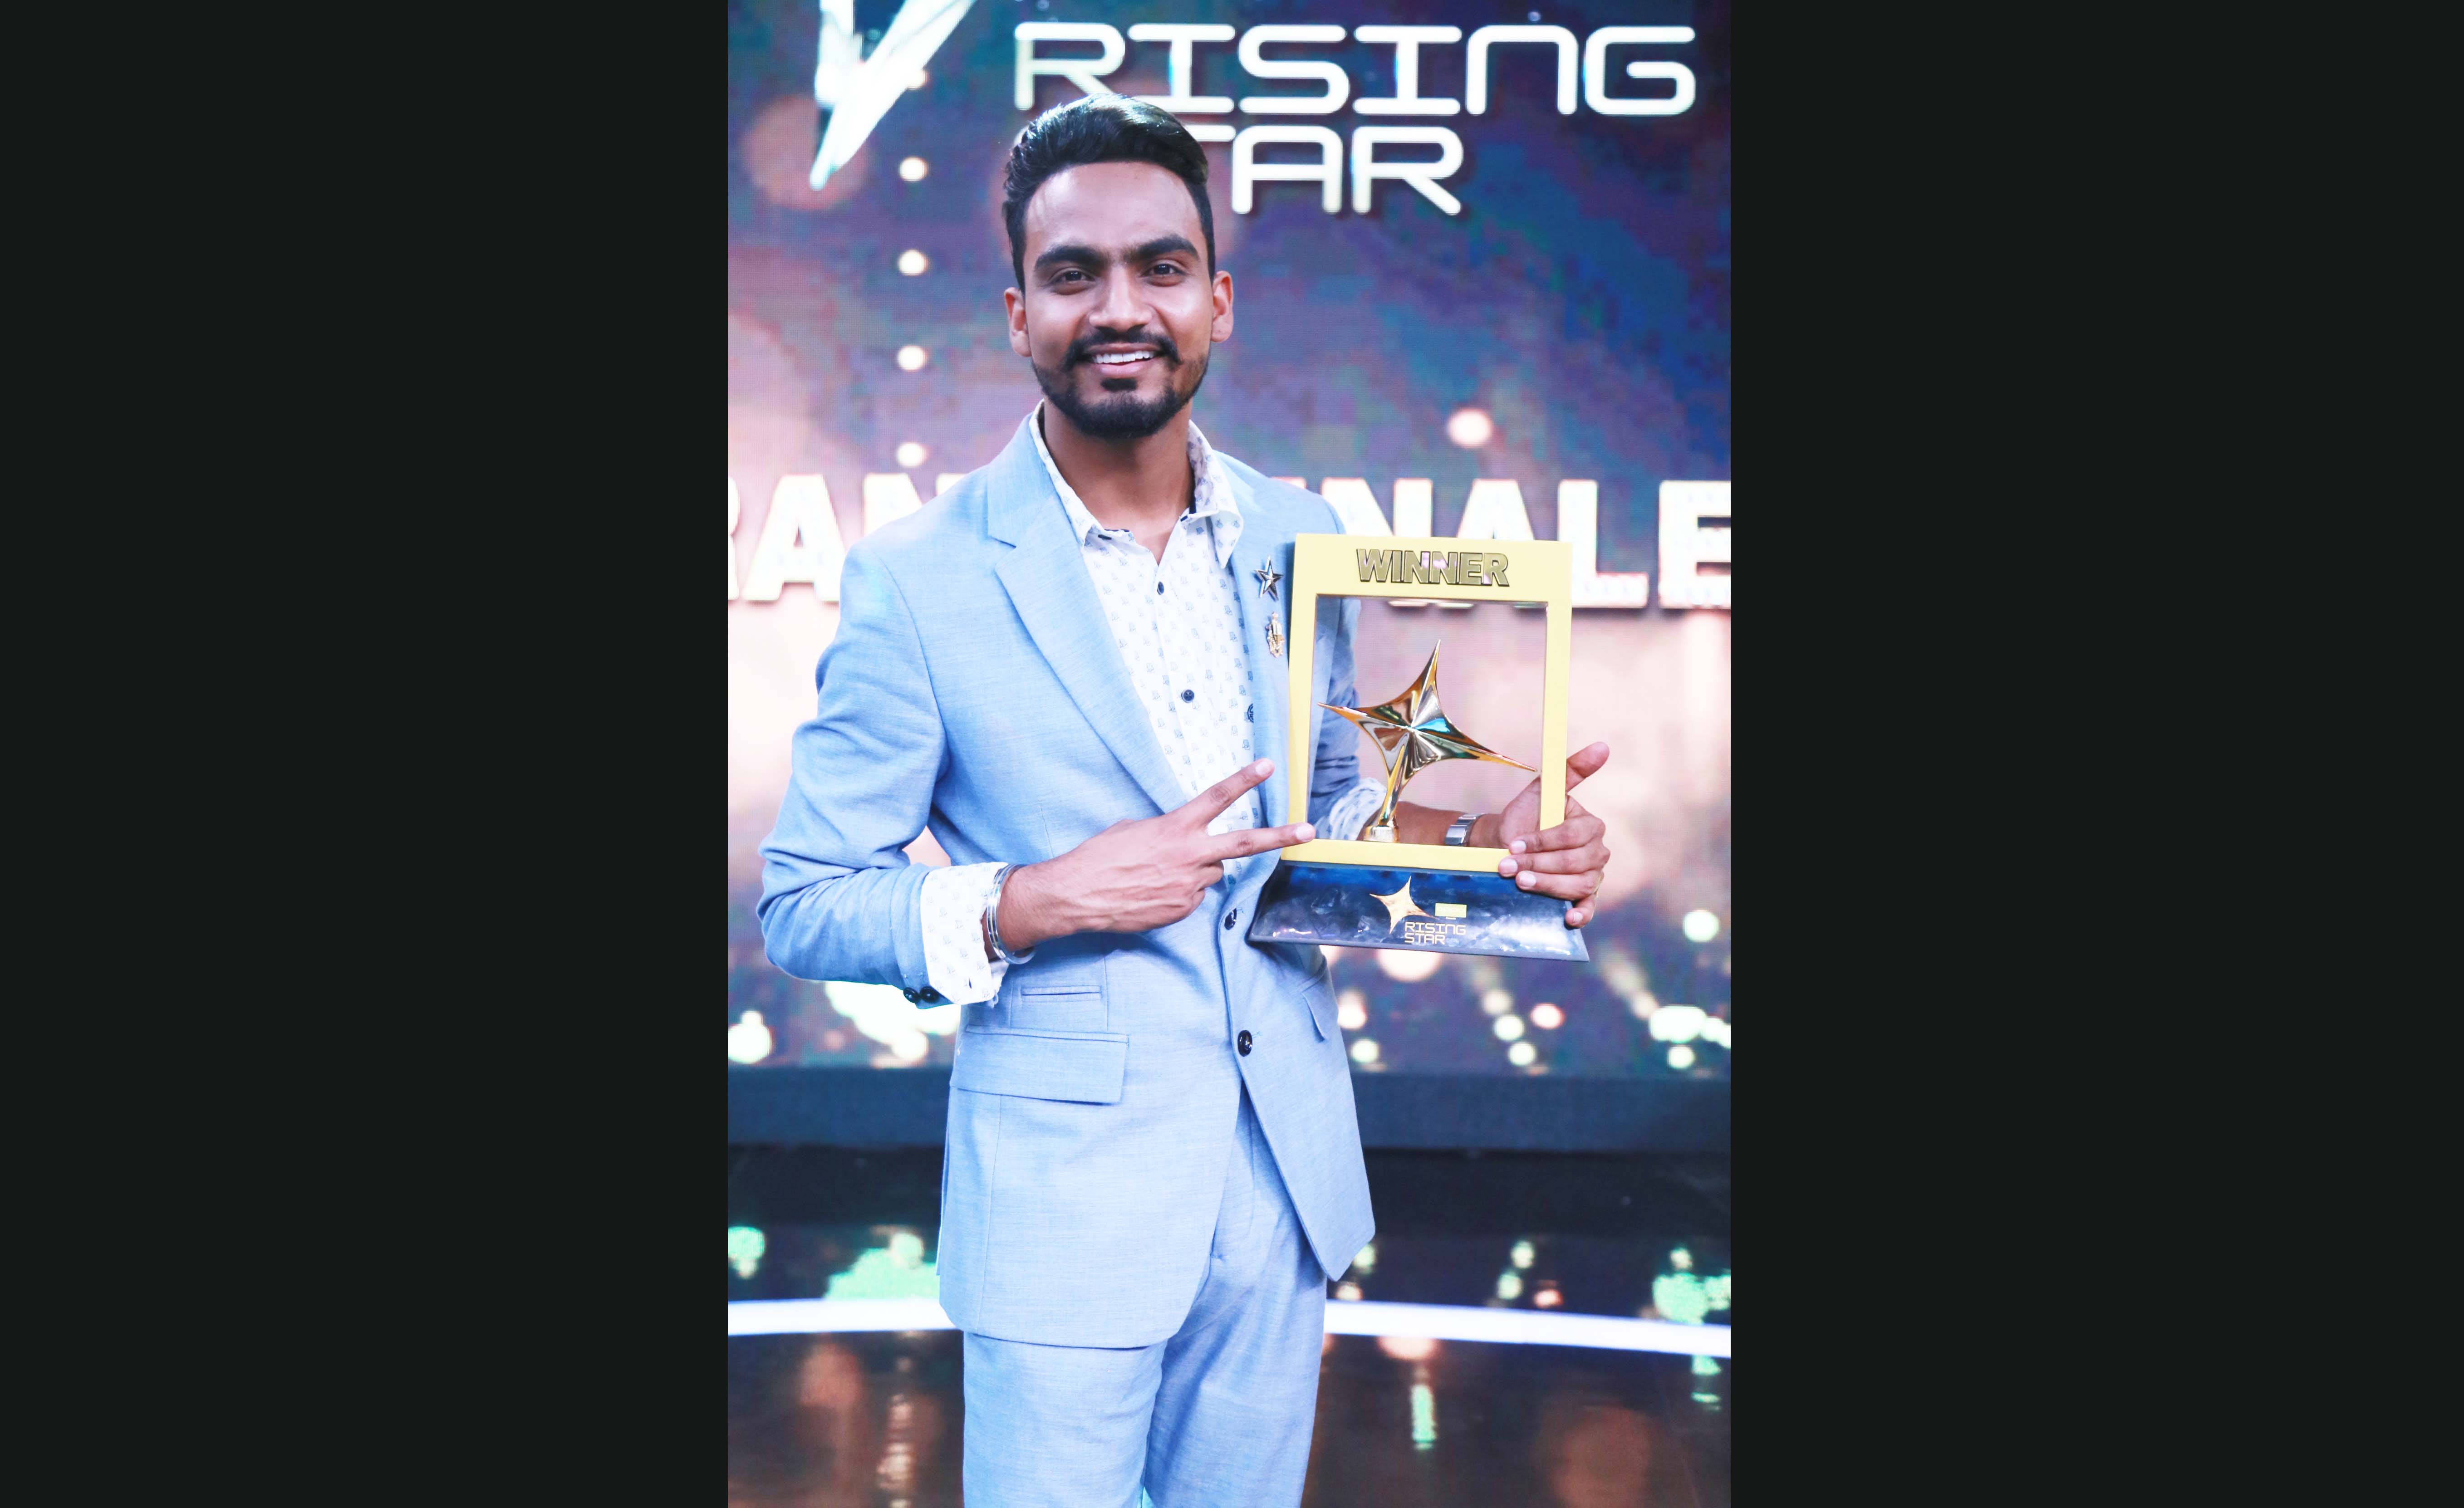 Rising Star winner Bannet Doasanjh with his trophy